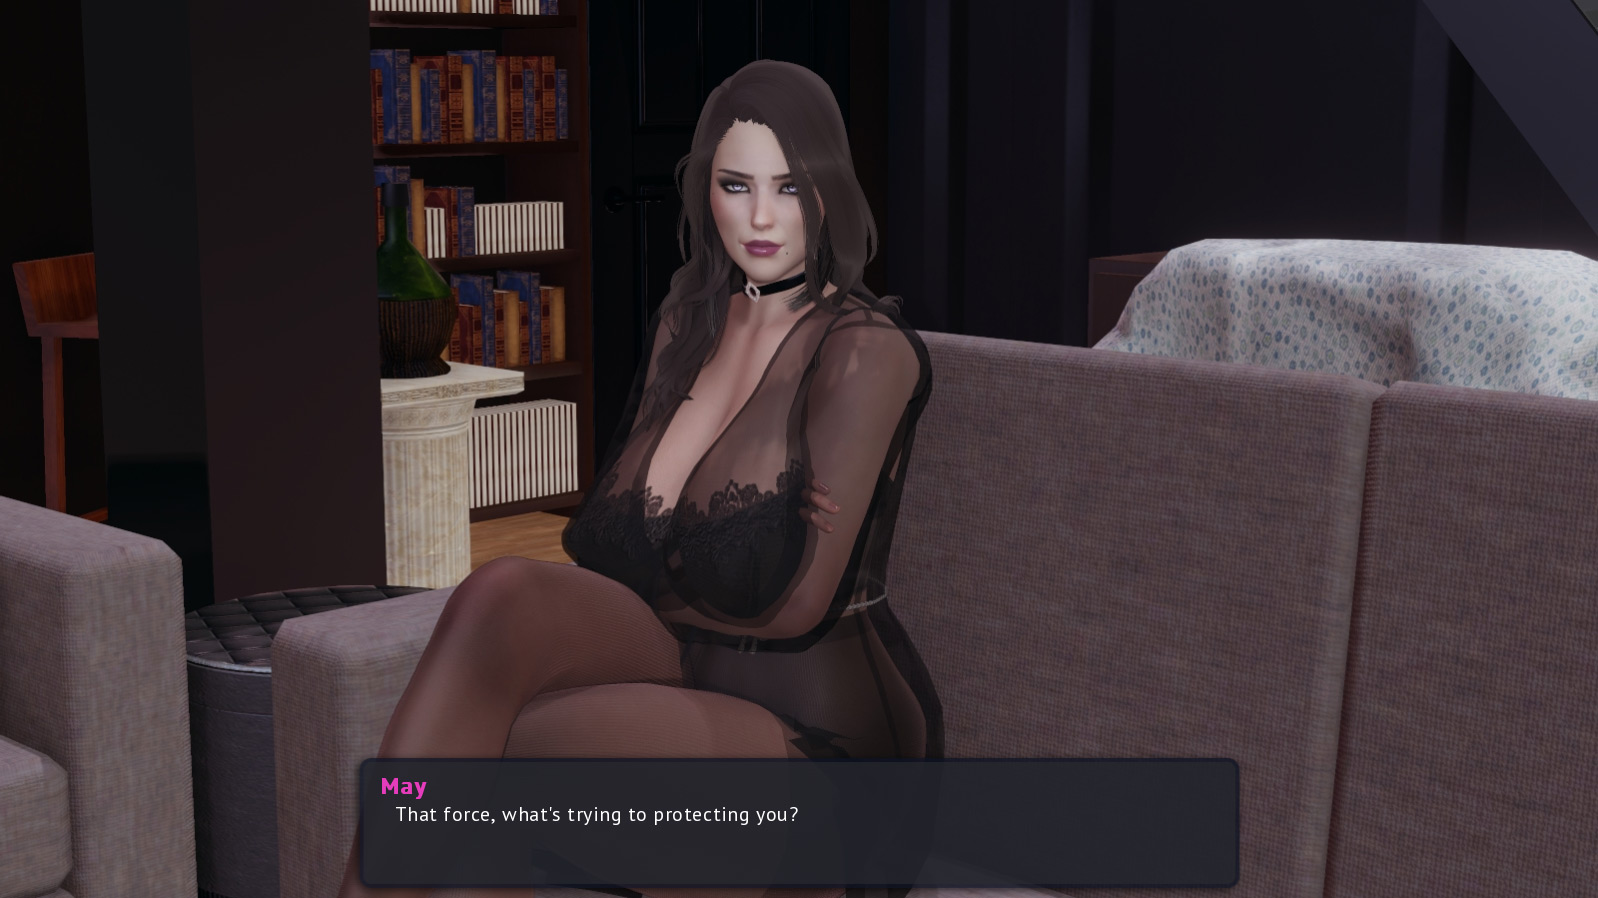 Milfy Day v0.7.3 MOD APK -  - Android & iOS MODs, Mobile  Games & Apps